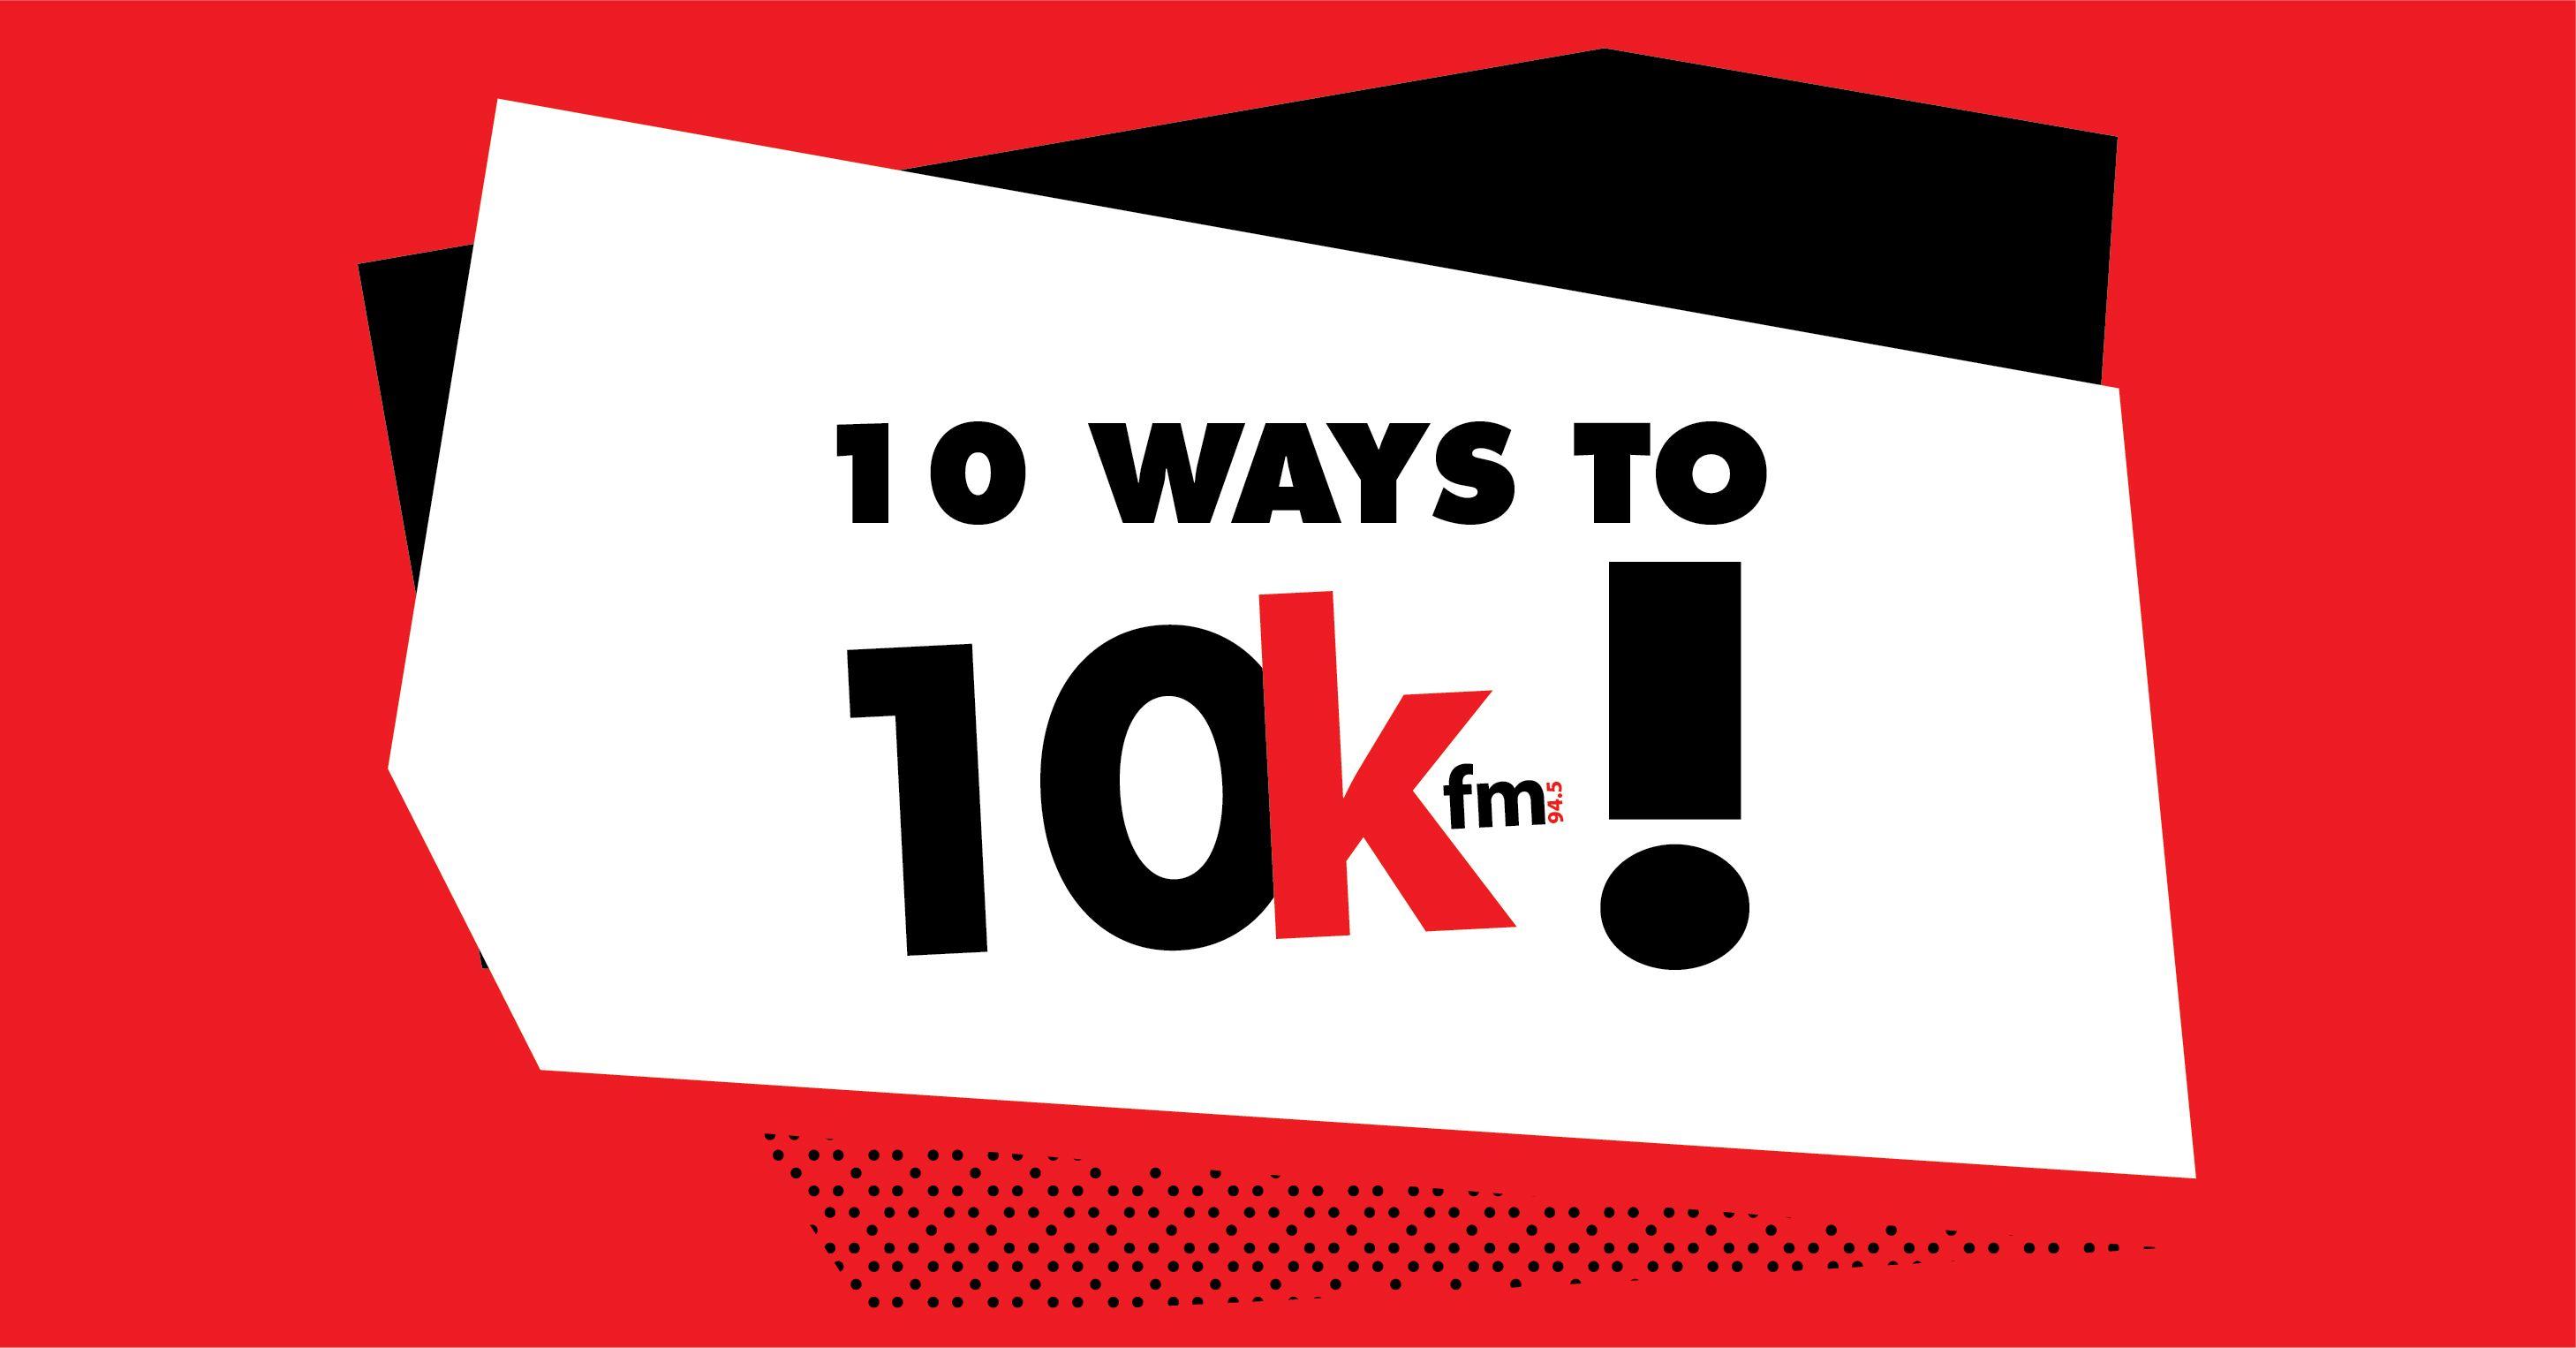 K in Red Rectangle Logo - Kfm 94.5 - Competitions - Find the Big Red K and win!